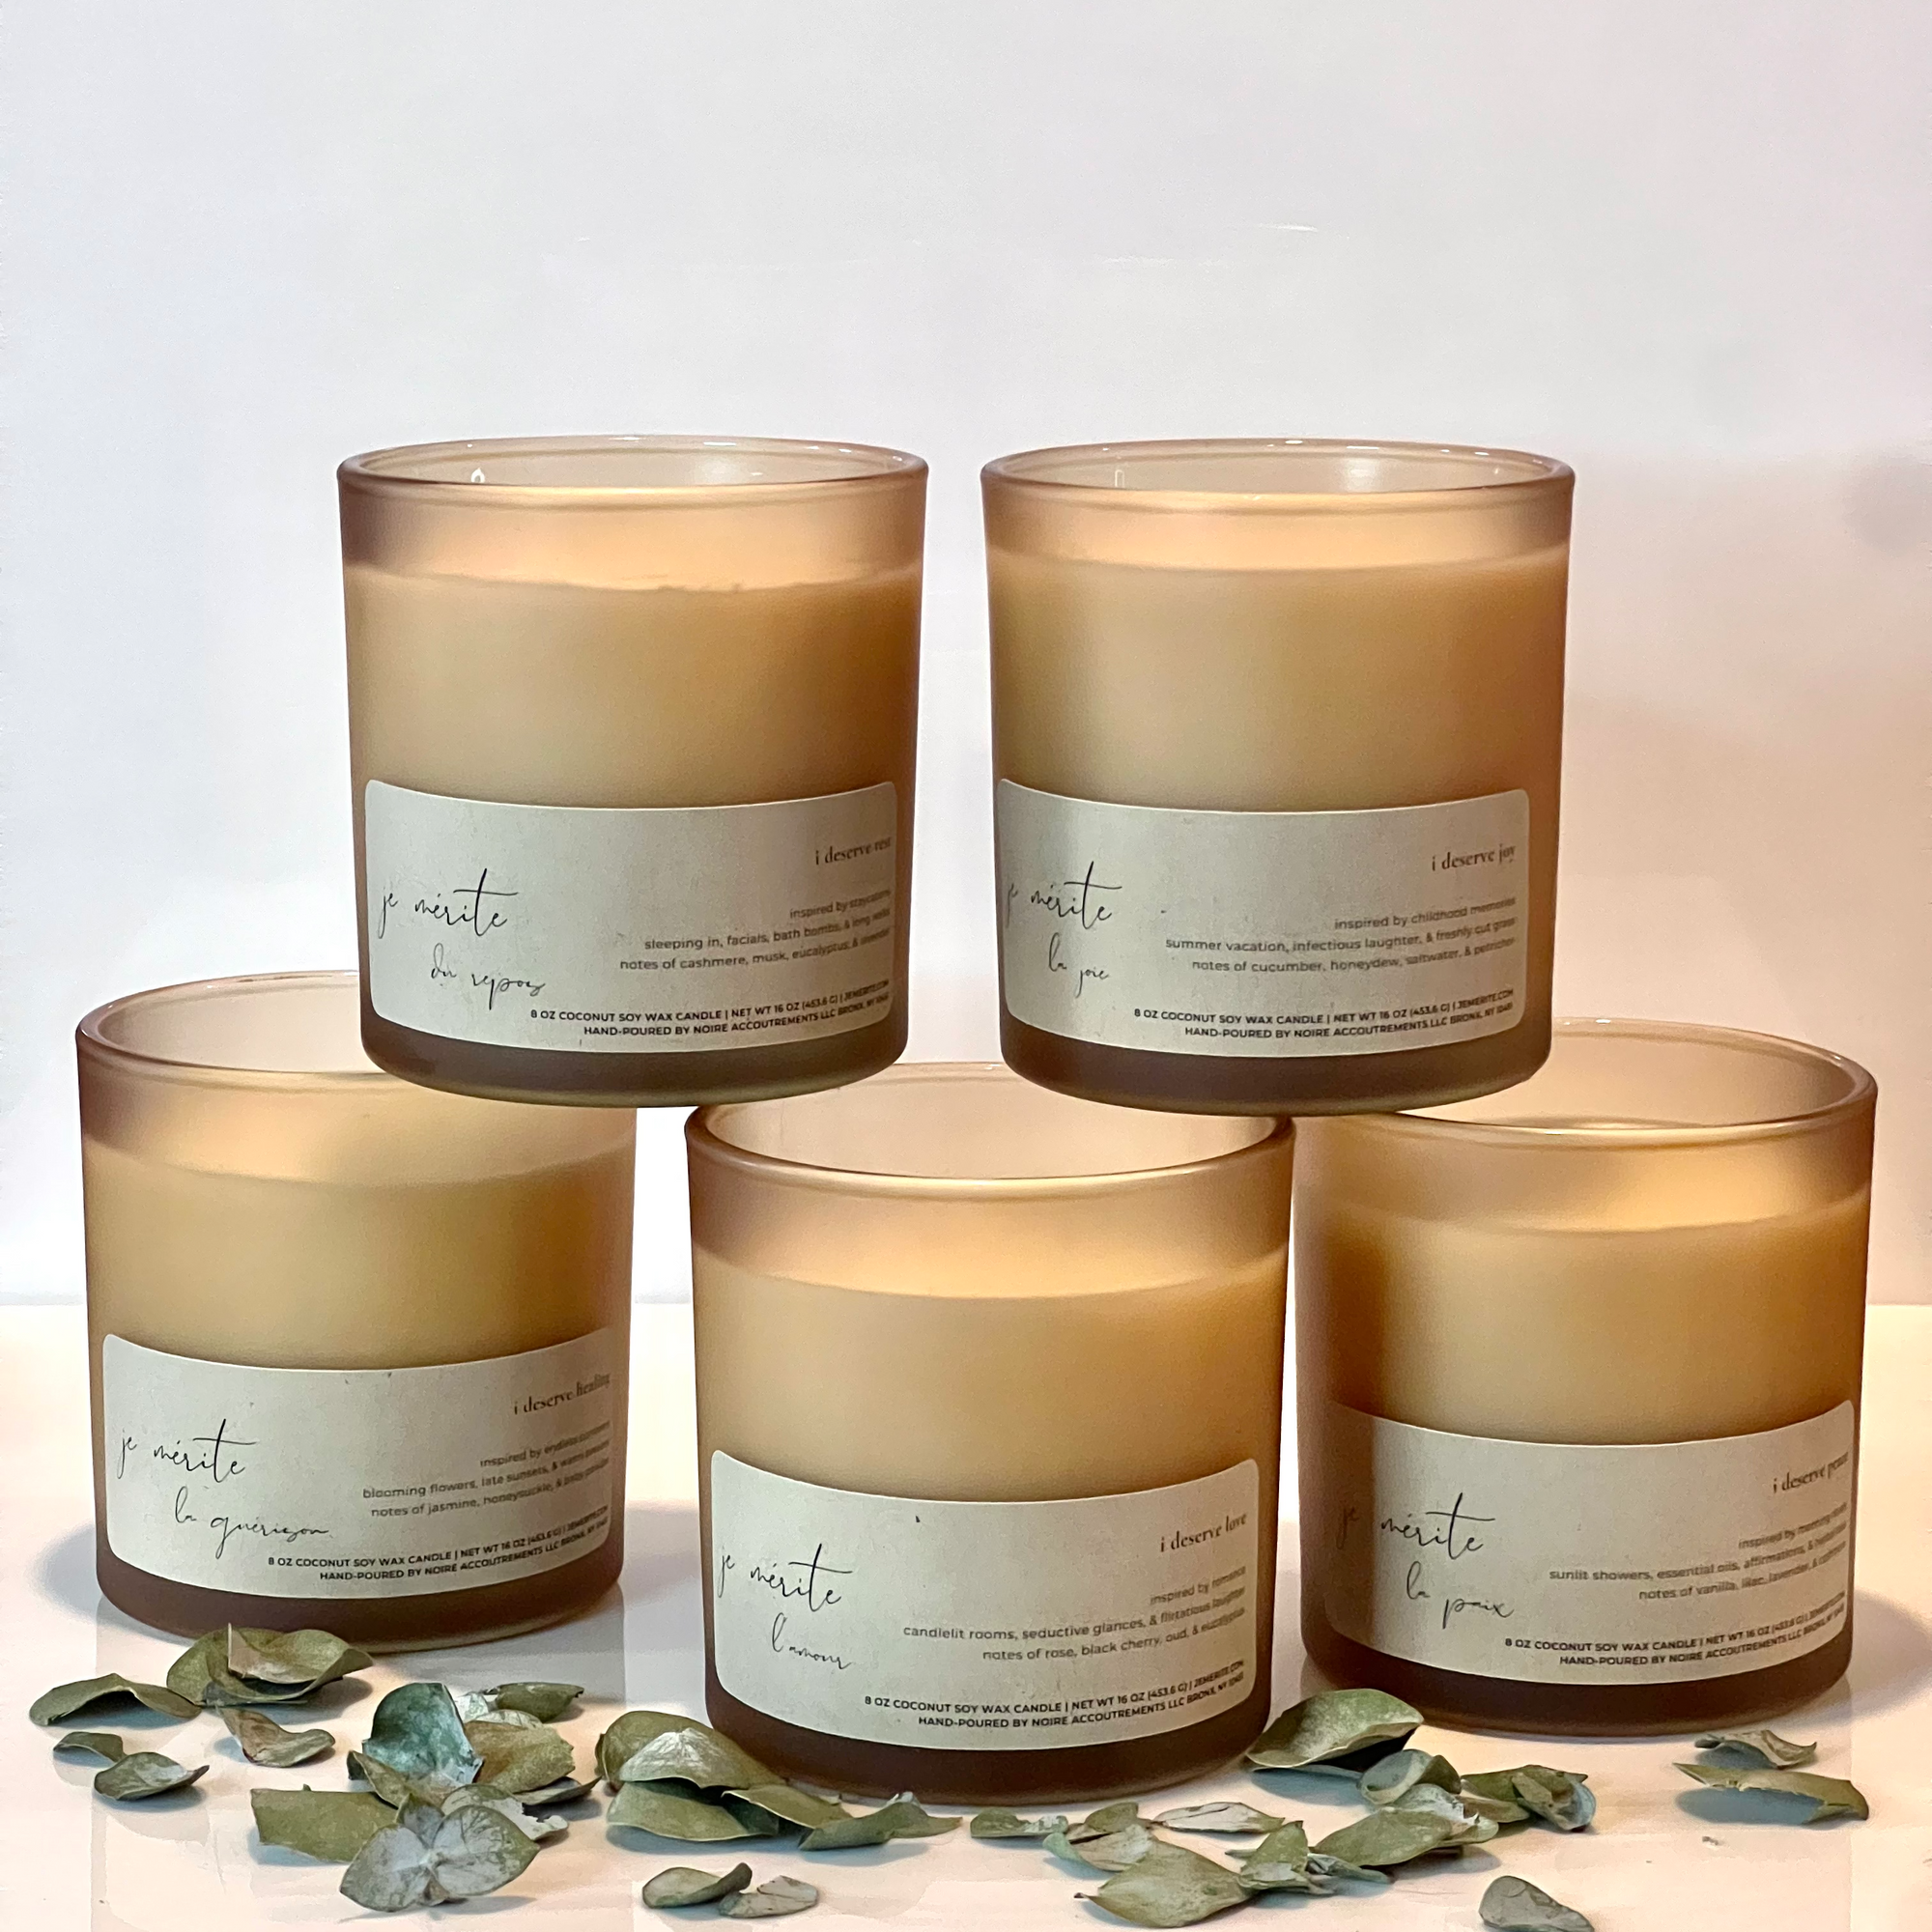 100% soy candle aromatherapy, gifts, notebooks, and home decor created and curated by je mérite founder, tamara charese, made in new york city